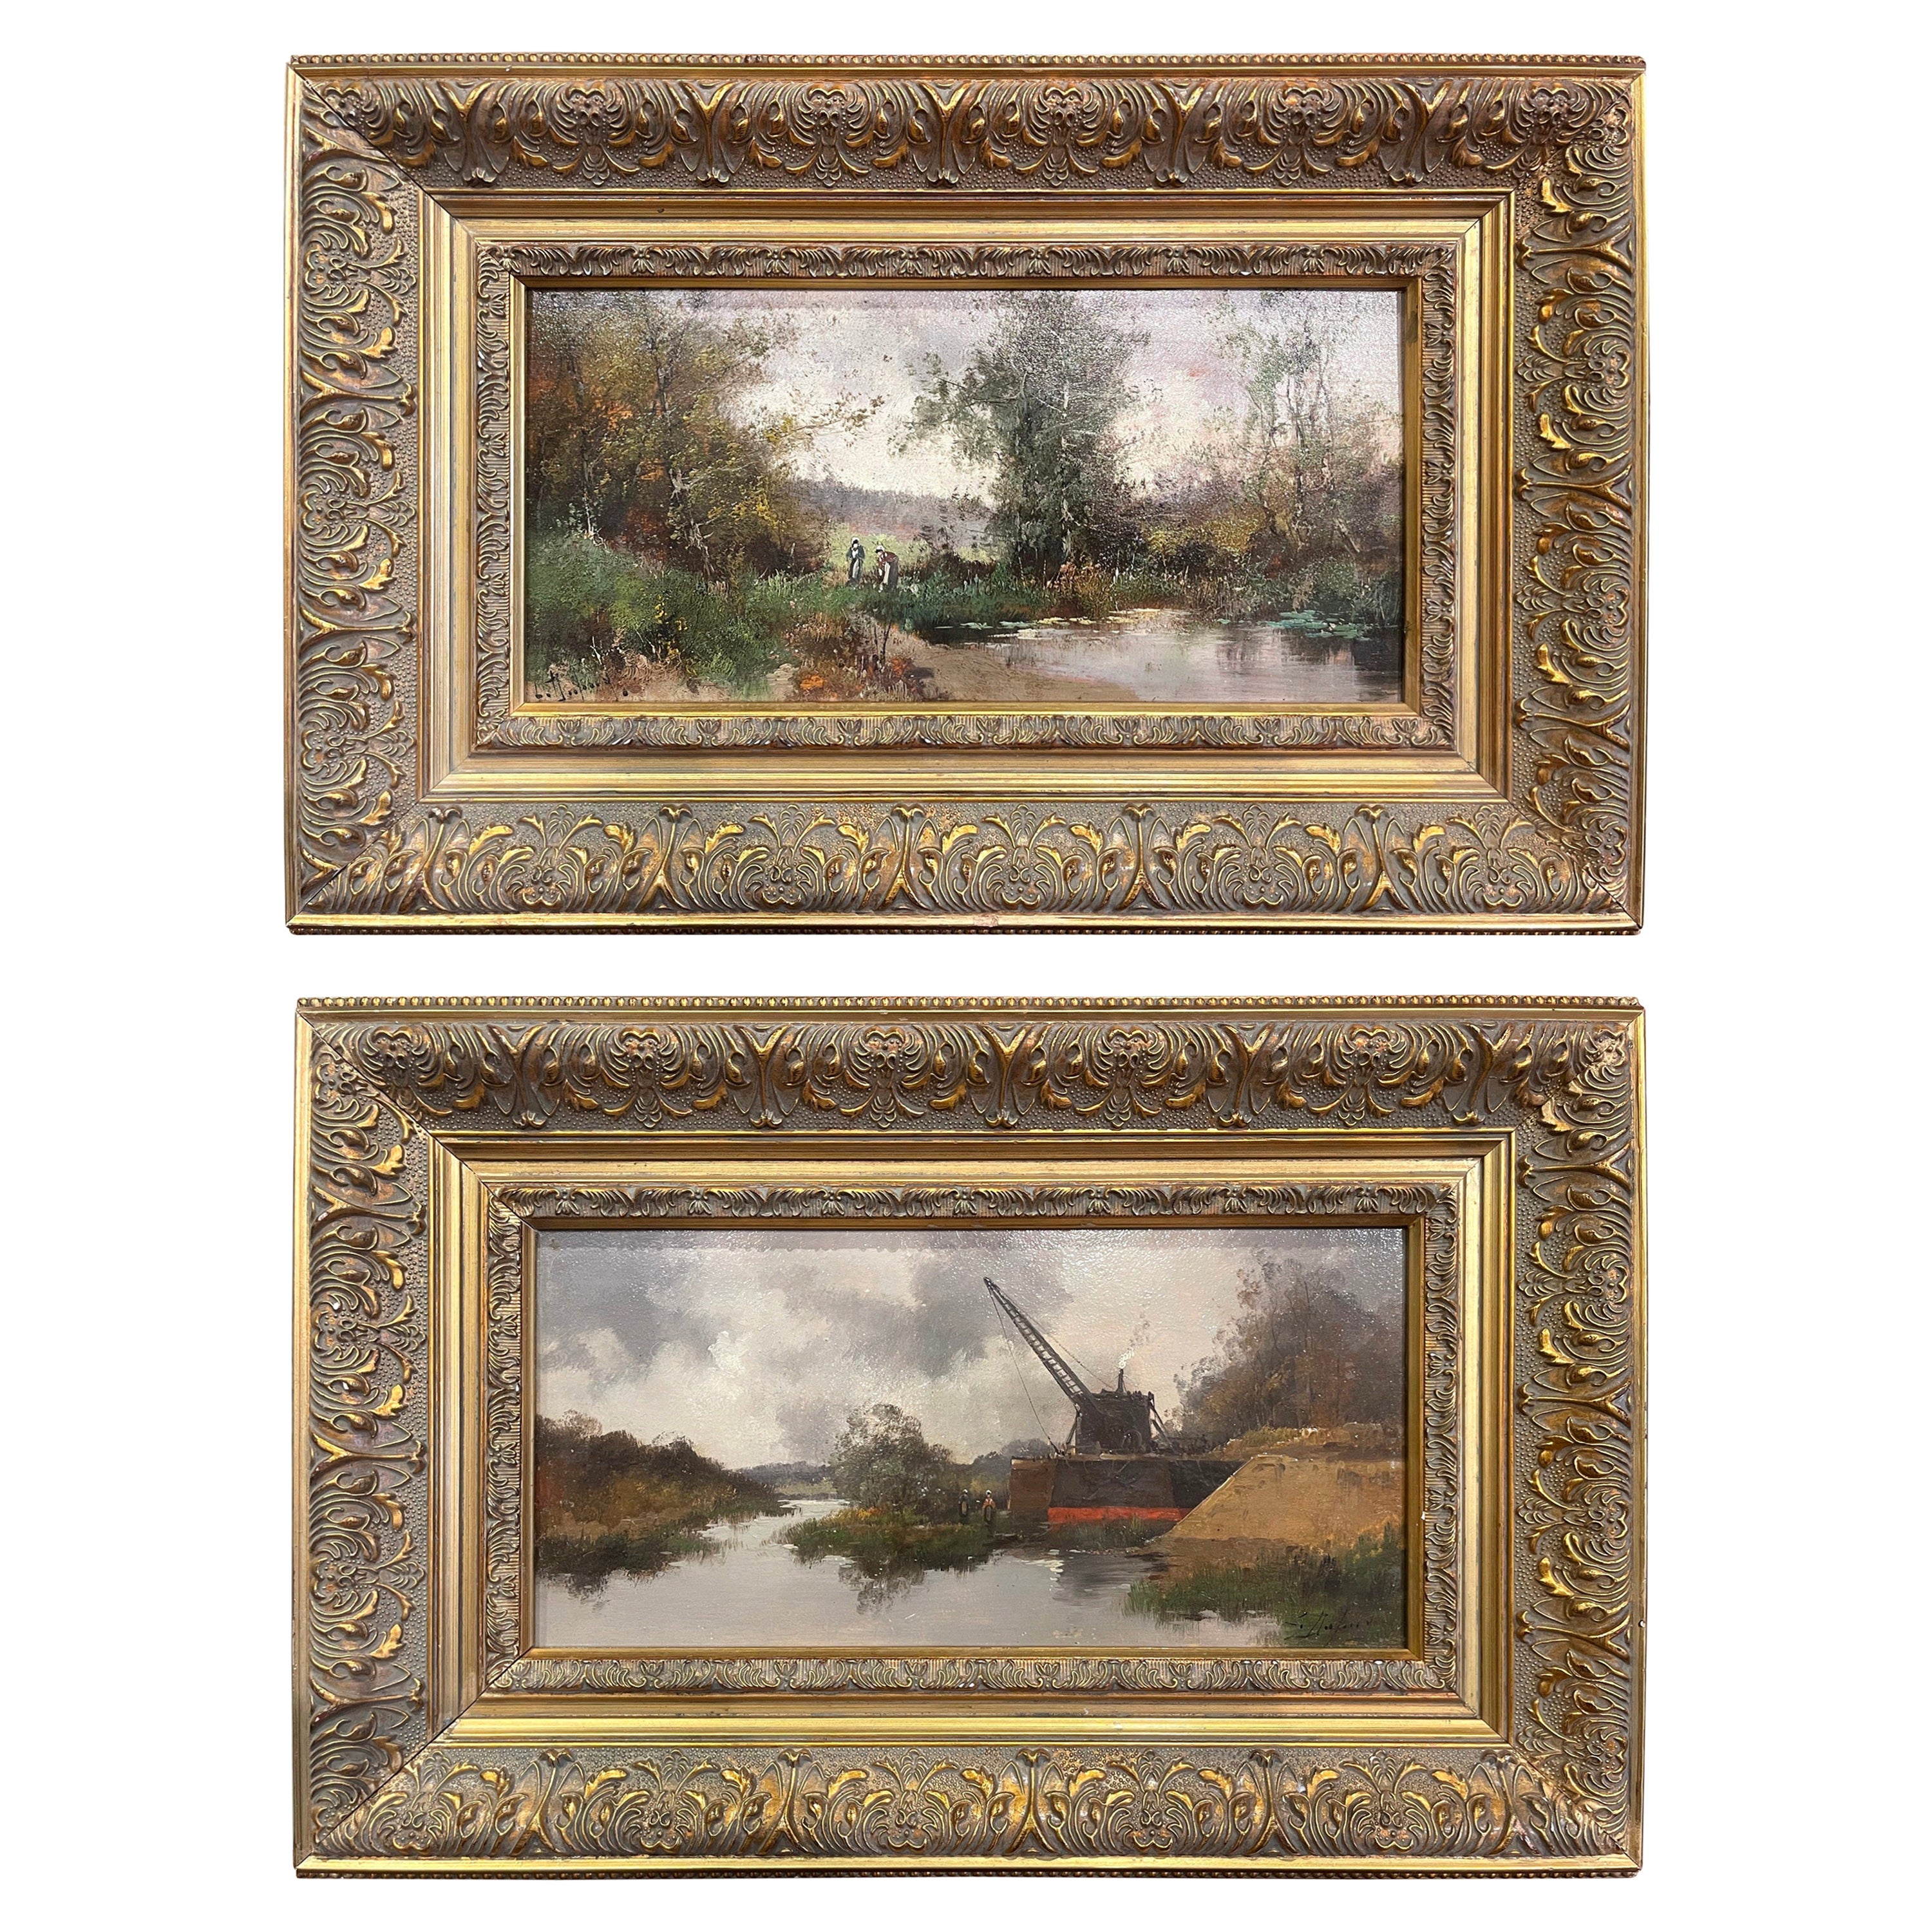 Pair of Framed Oil on Board Paintings Signed Leon Dupuy for E. Galien-Laloue